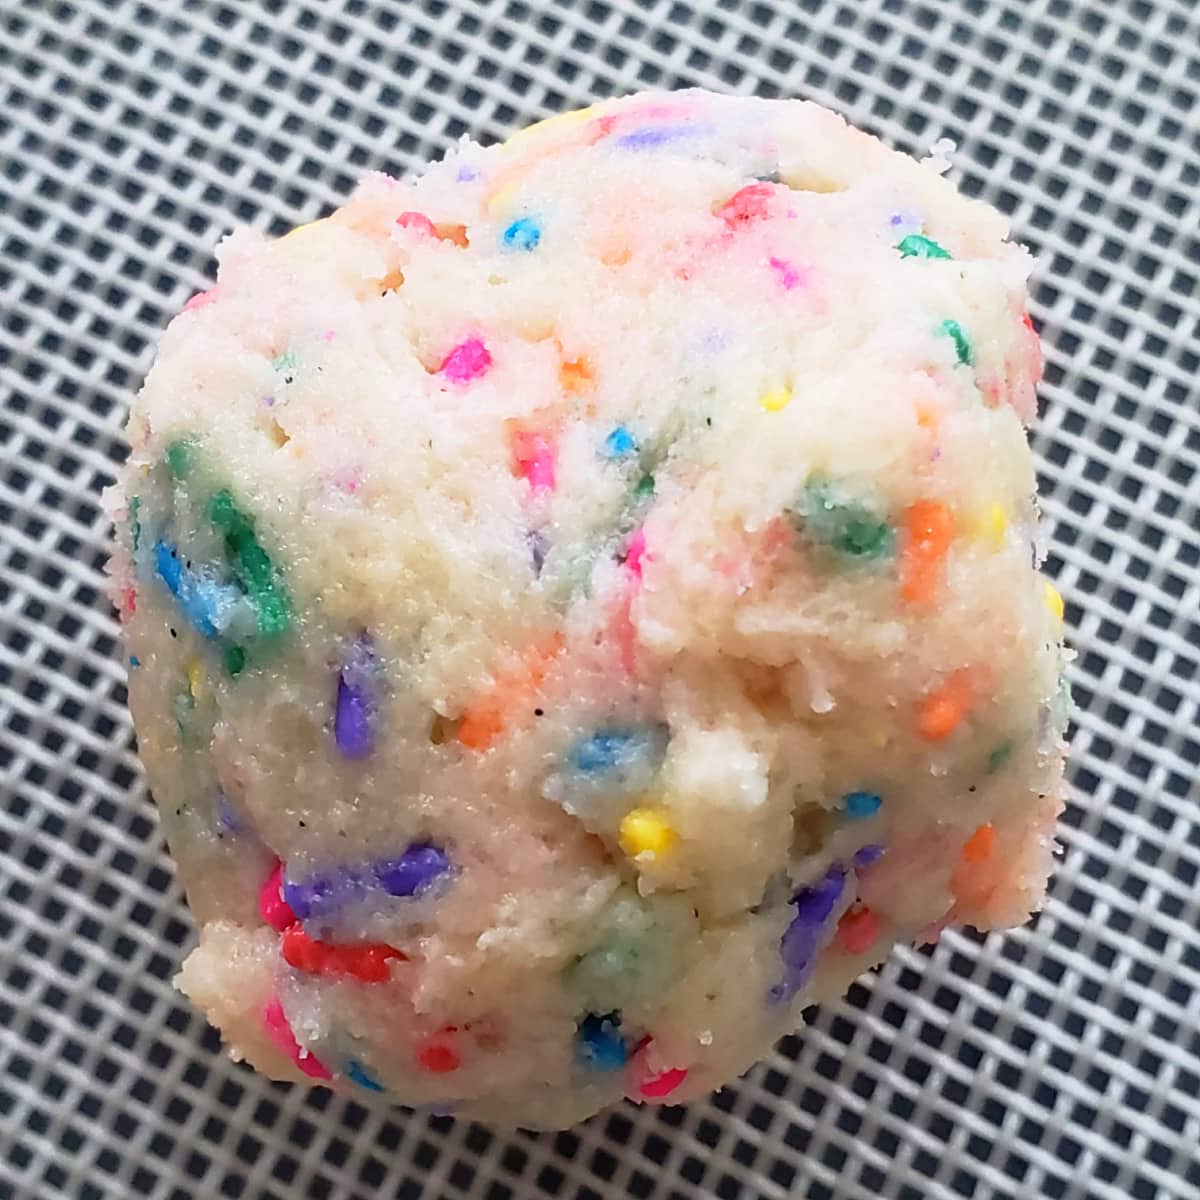 Cookie dough embedded with lots of colorful sprinkles and placed on a silicone liner 20 cookies